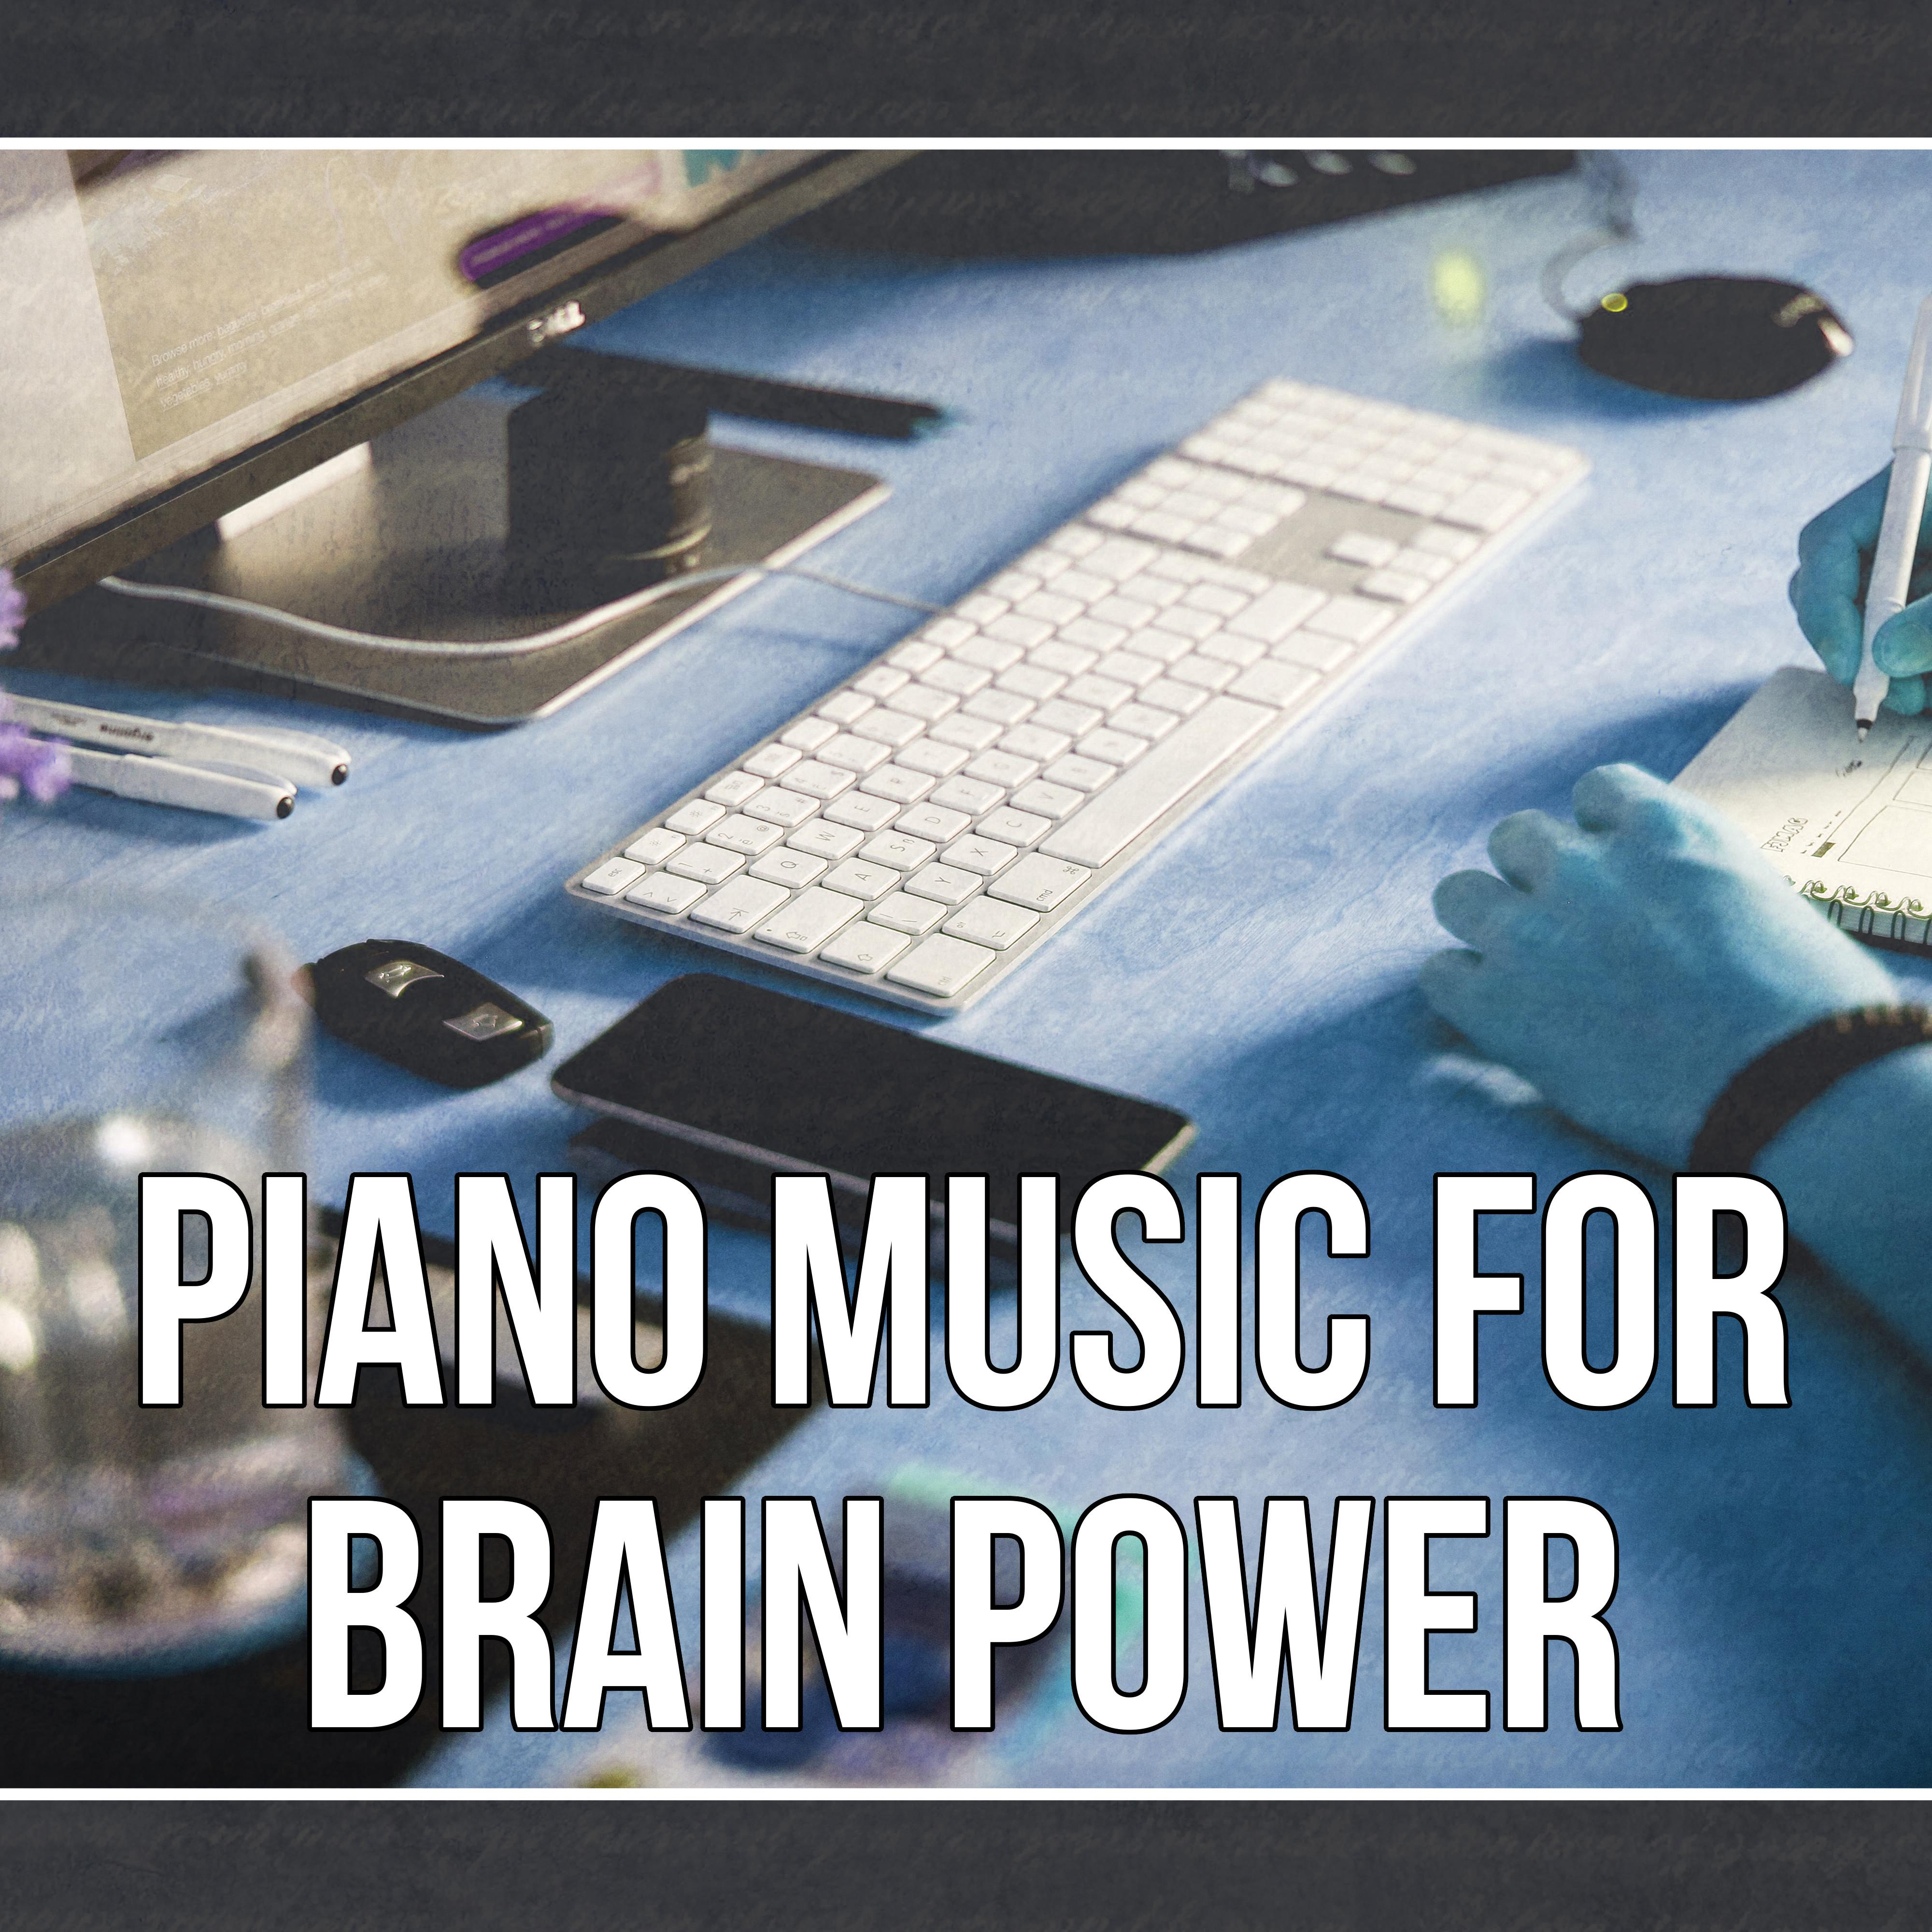 Piano Music for Brain Power – Nature Sounds for Your Brain Power, Music that Helps to Focus and Concenrate on Work